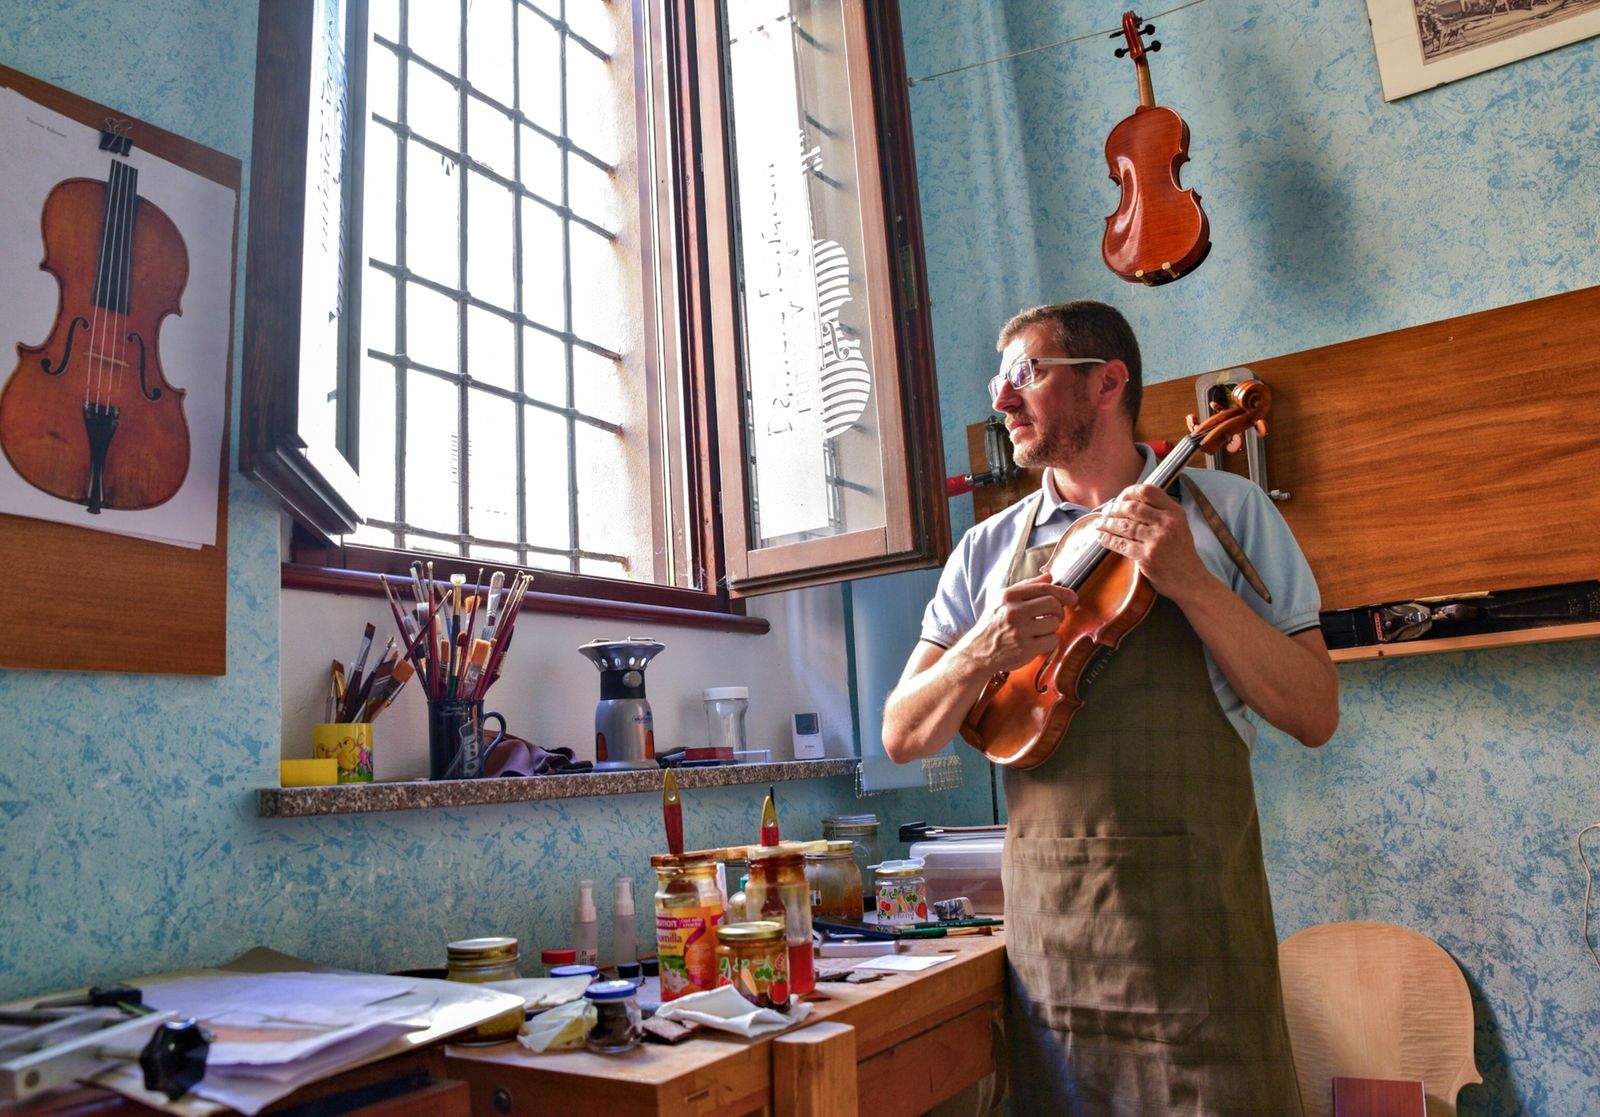 Italy's violin capital with music recovers from COVID-19